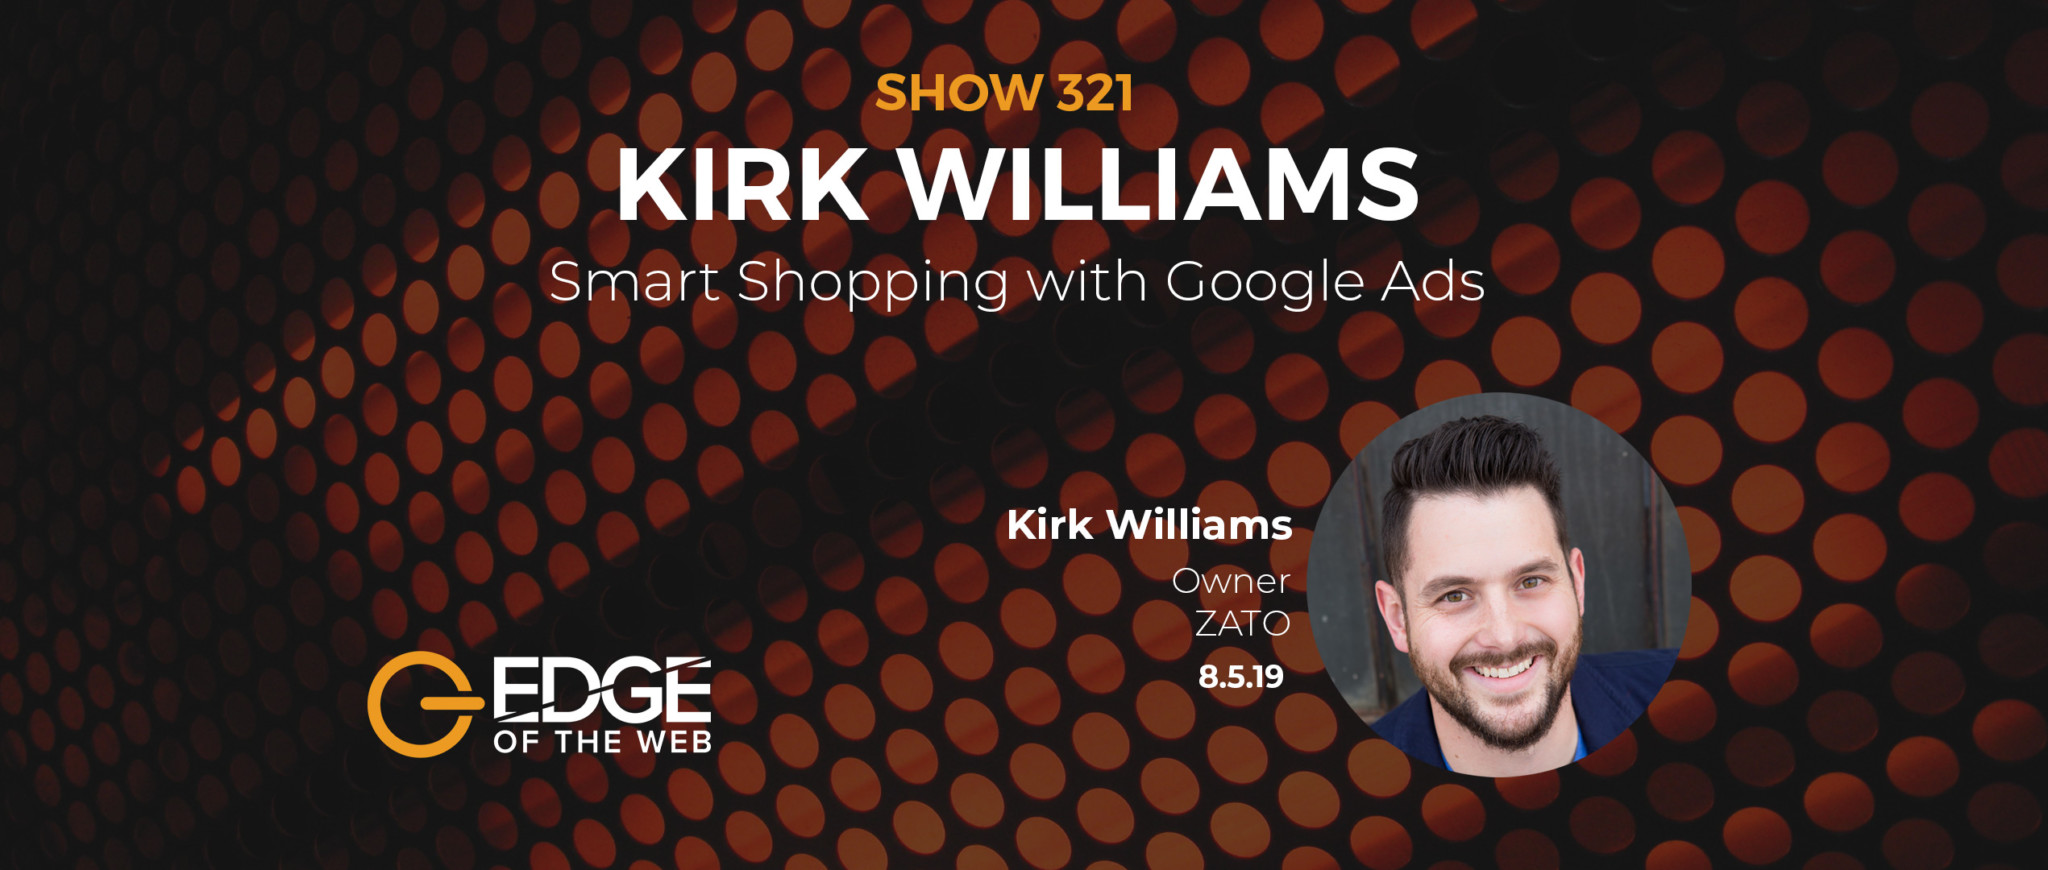 Show 321: Smart Shopping with Google Ads, featuring Kirk Williams